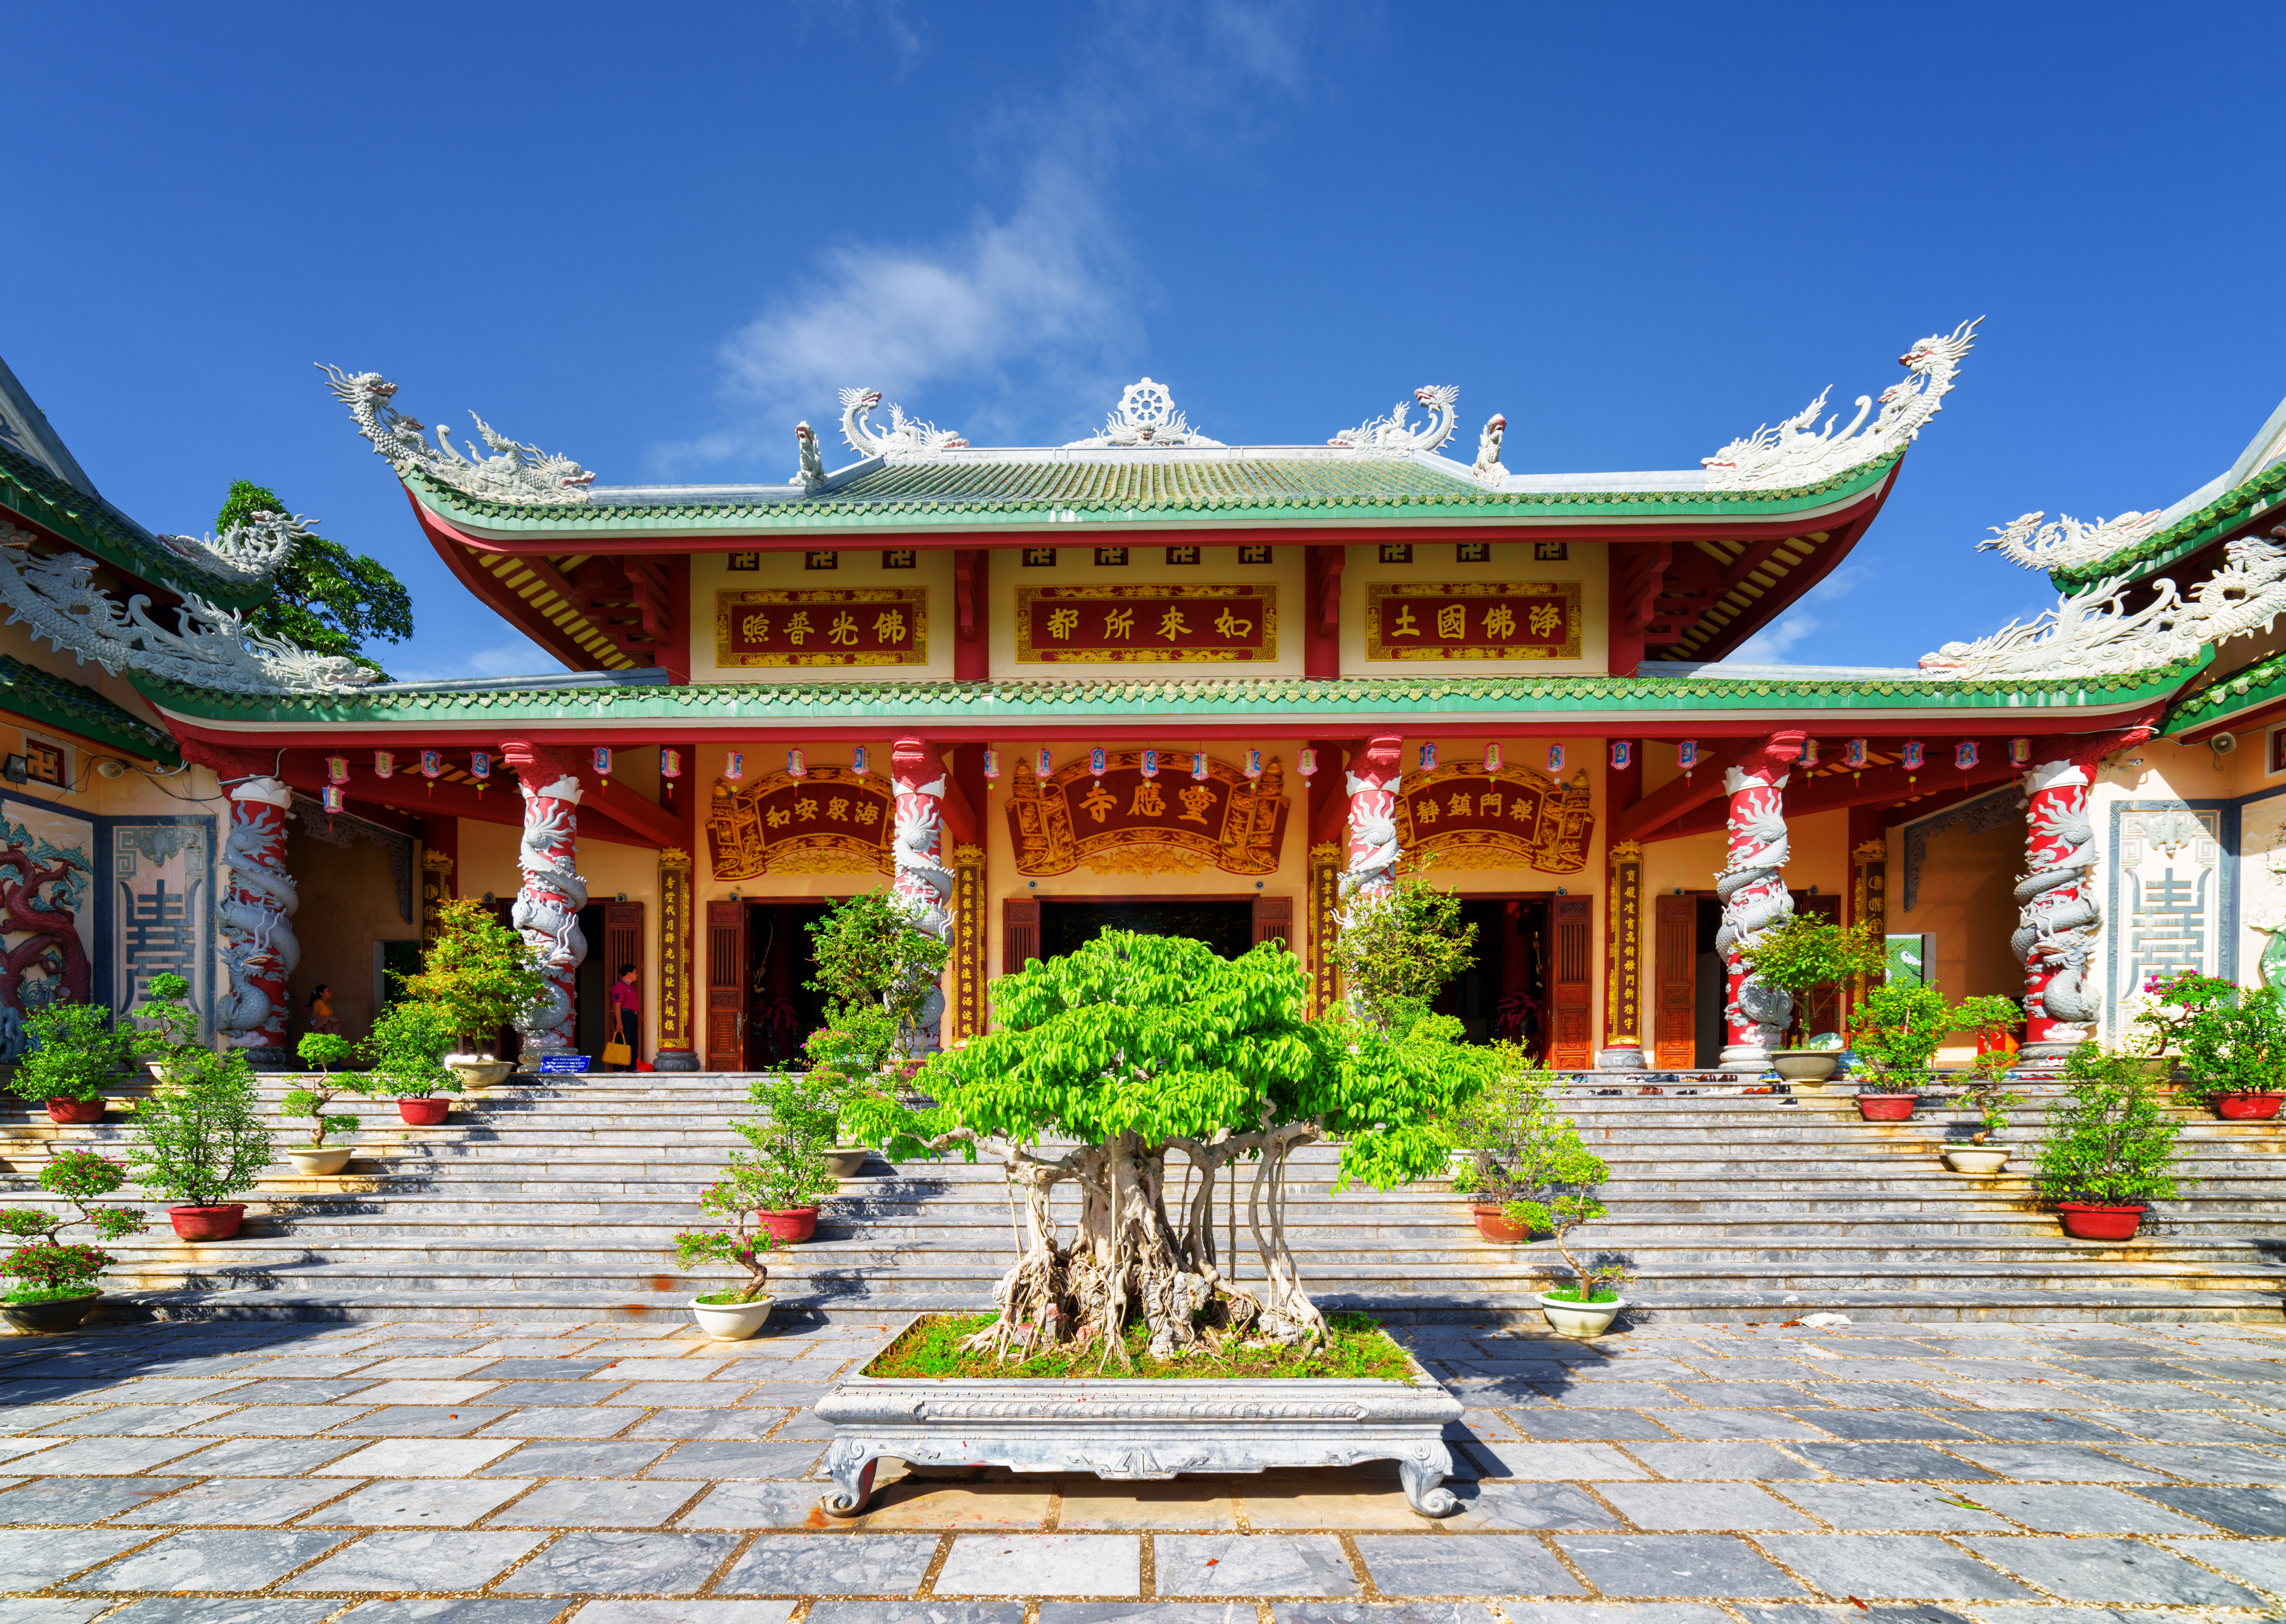 Check Out These Beautiful Towns in Vietnam - Linh Ung Pagoda in Da Nang Vietnam